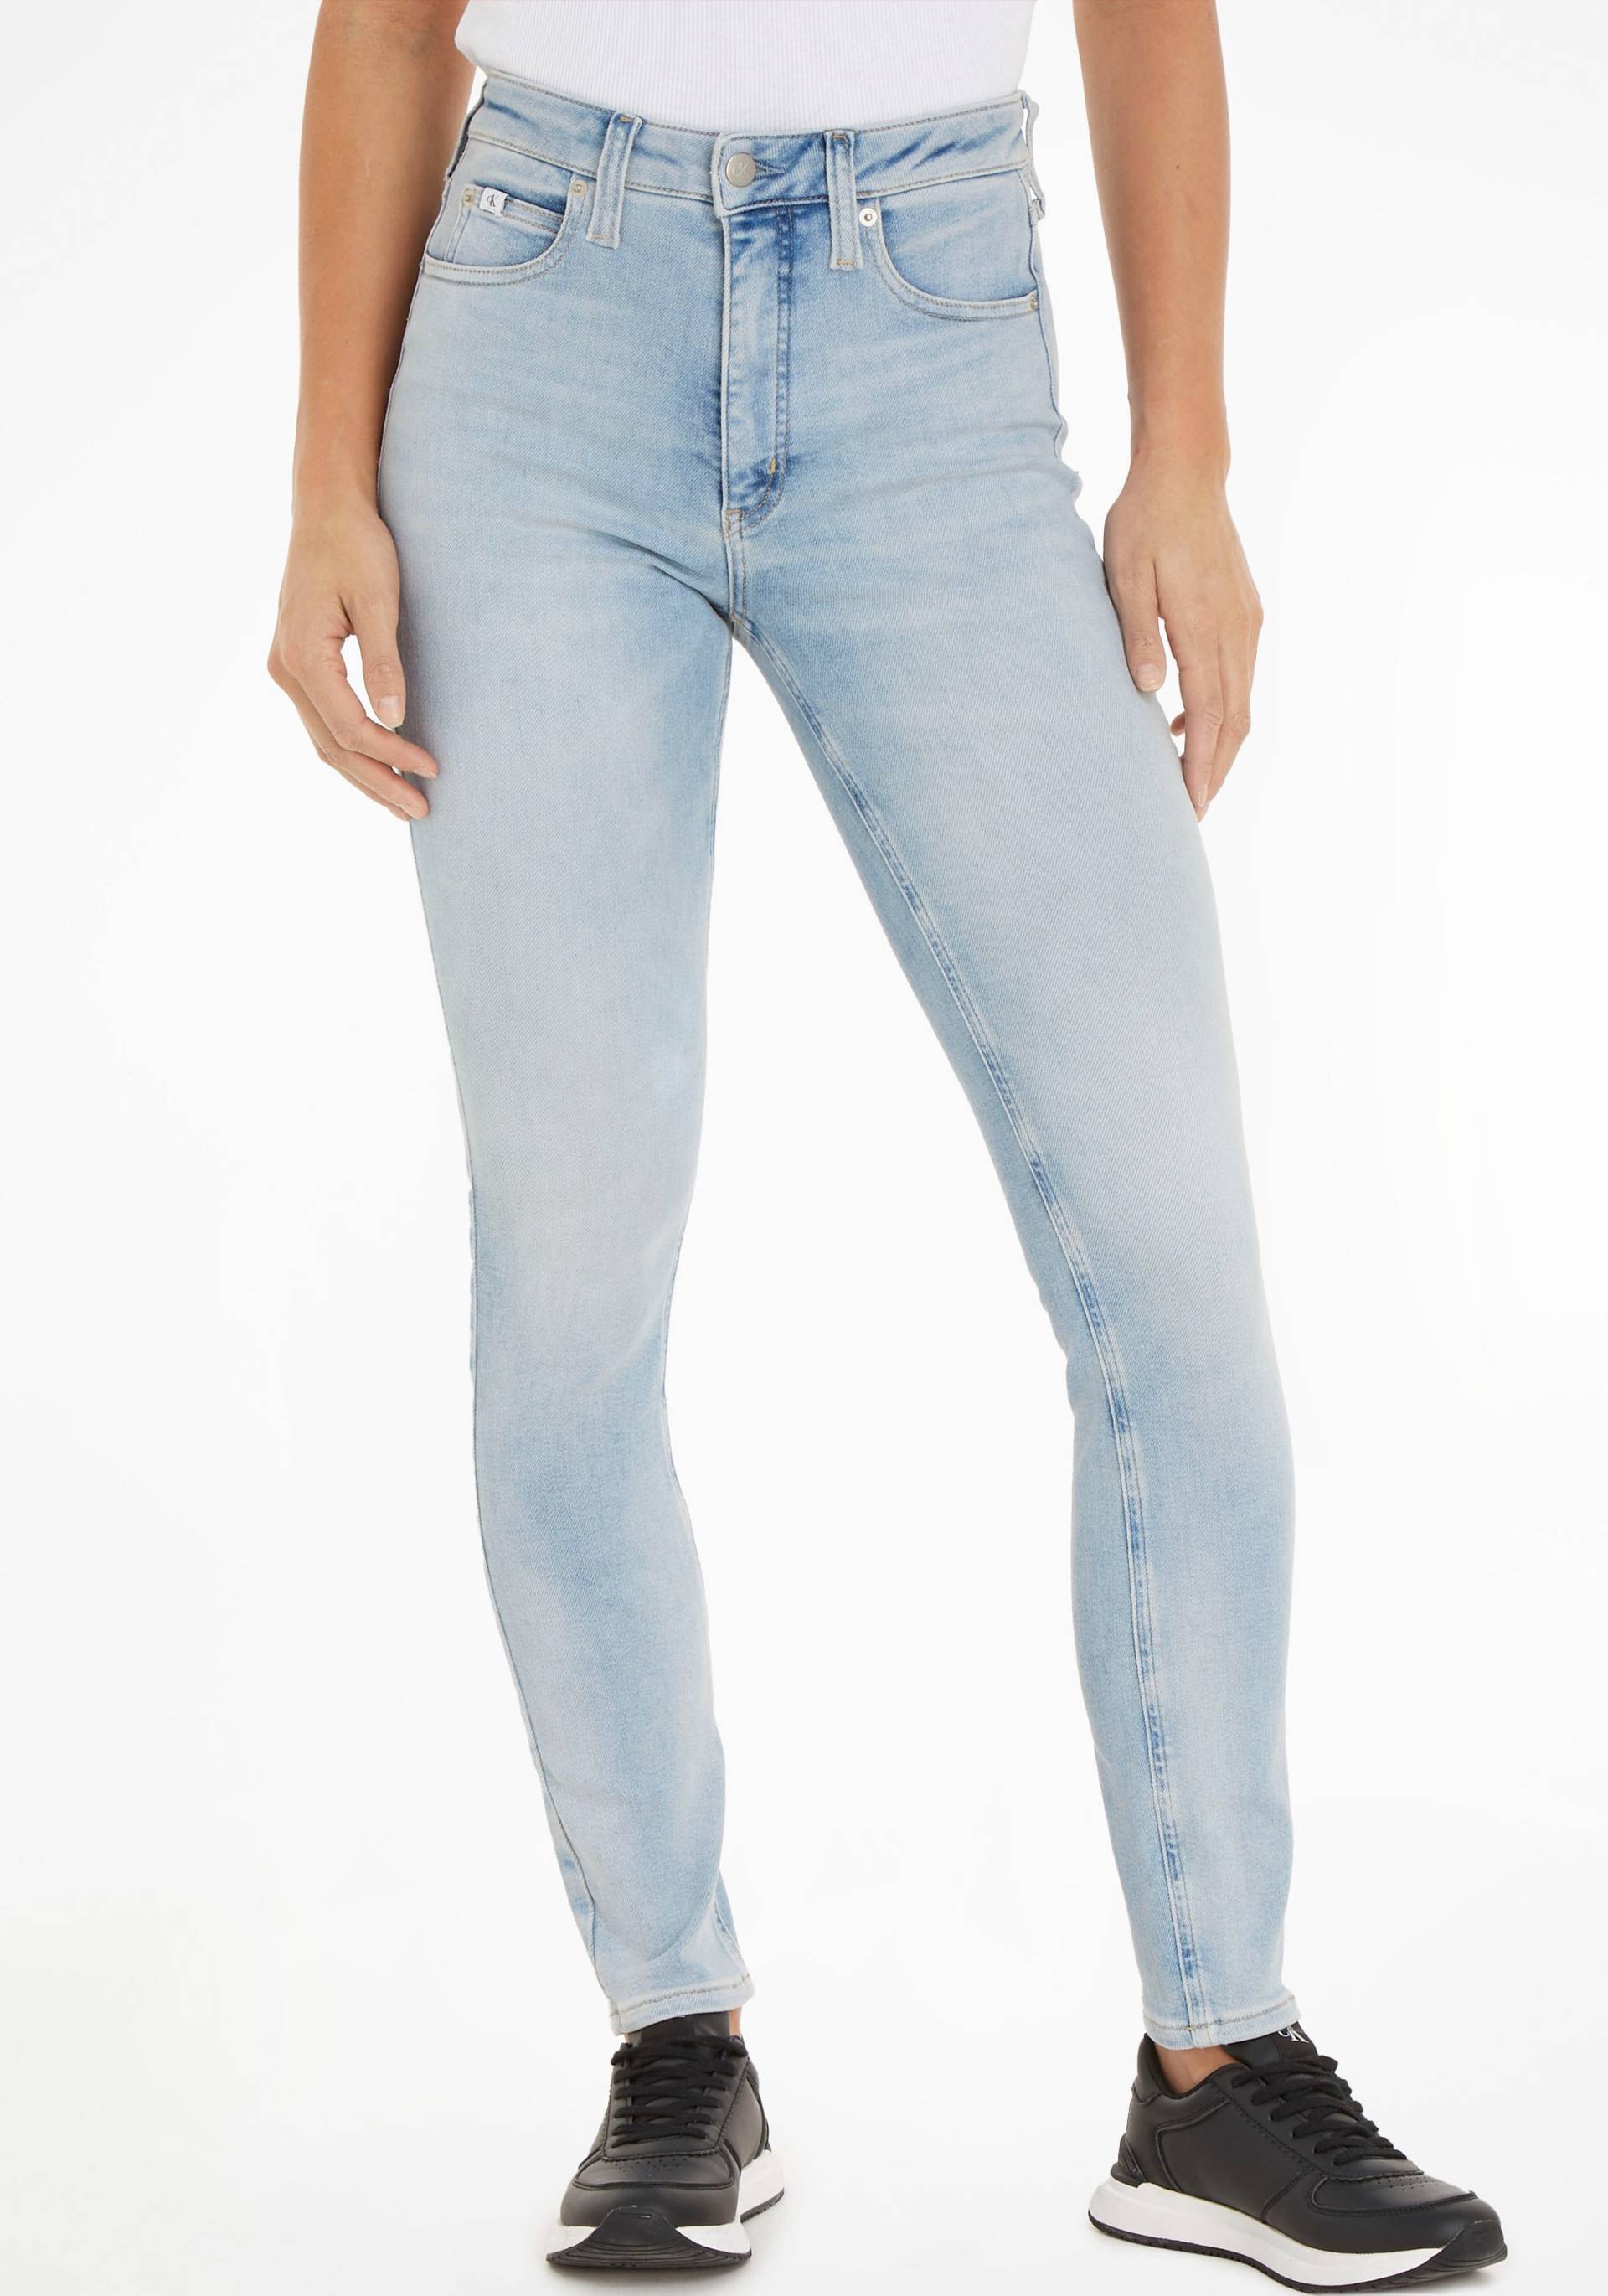 Calvin Klein Jeans Skinny-fit-Jeans »HIGH RISE SKINNY« von Calvin Klein Jeans